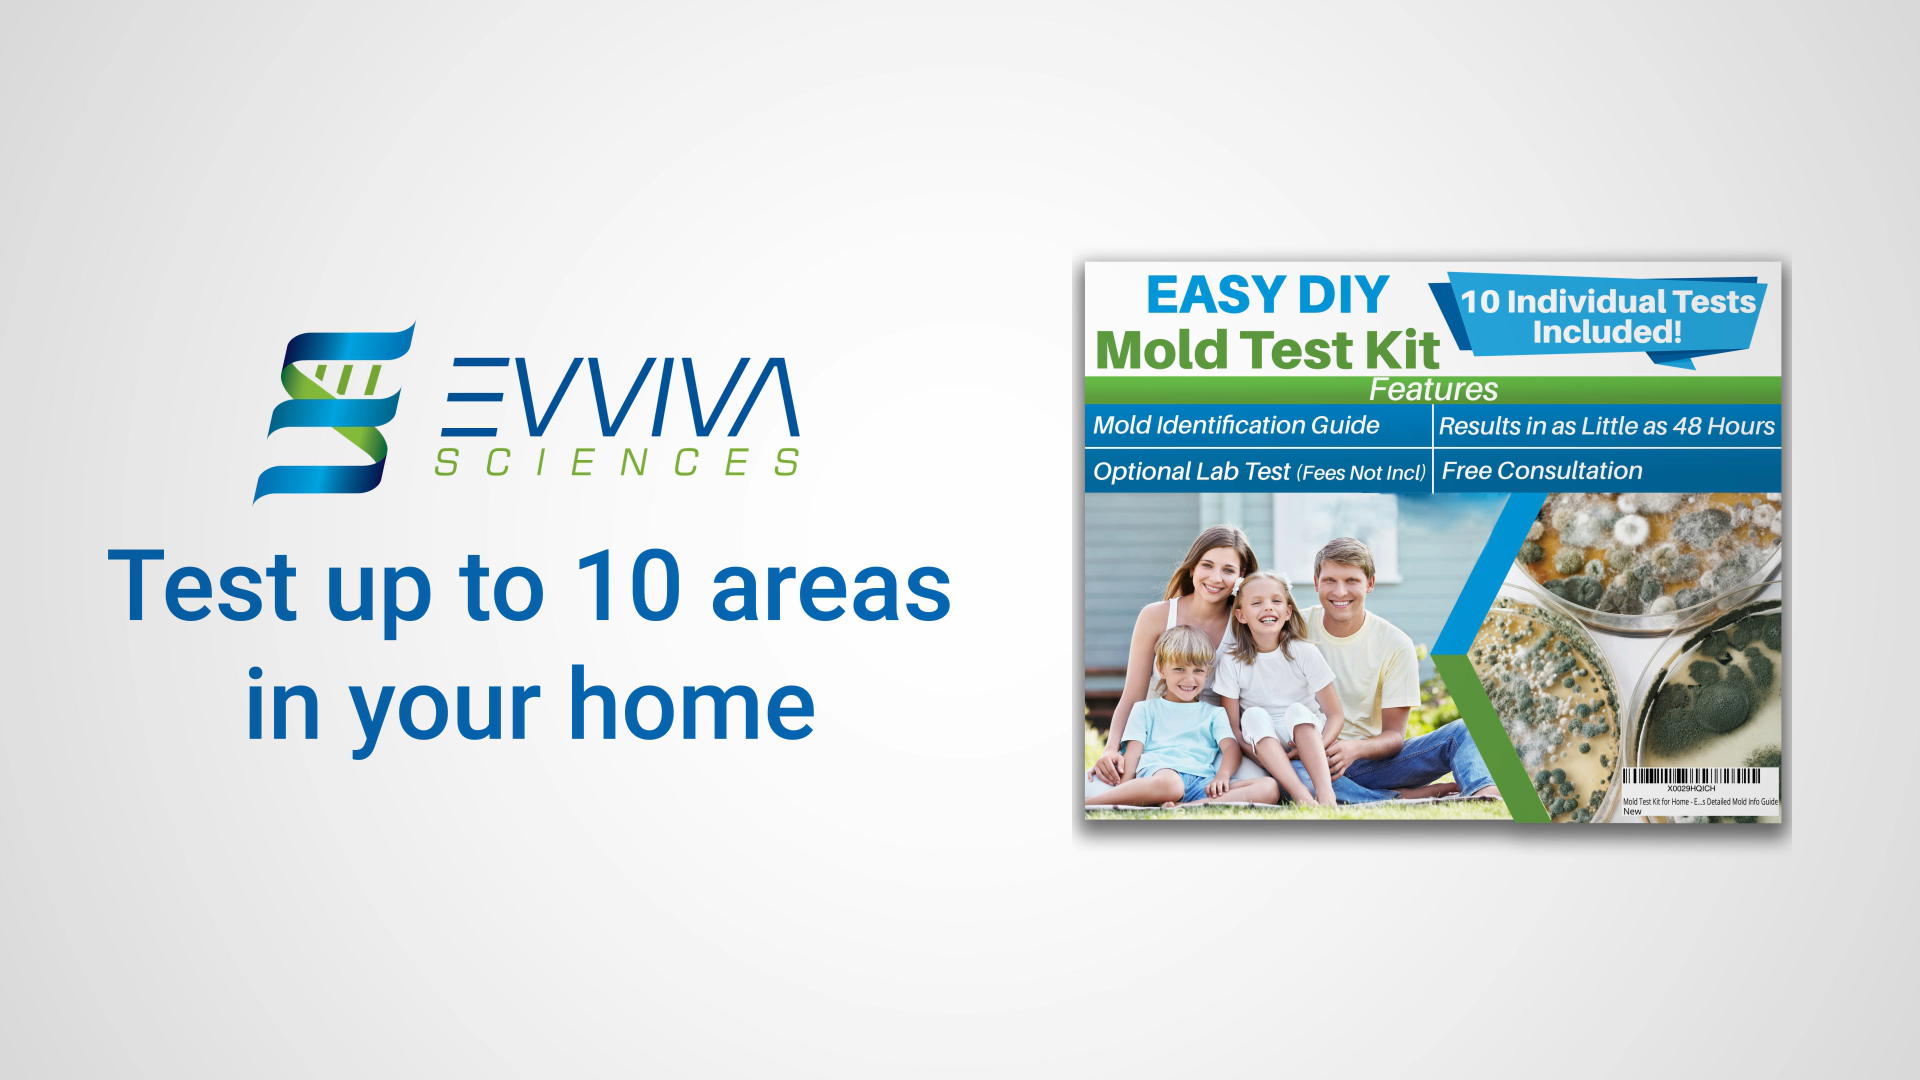 Best Mold Detection Kits for Your Home: Best At-Home Mold Testing Kits